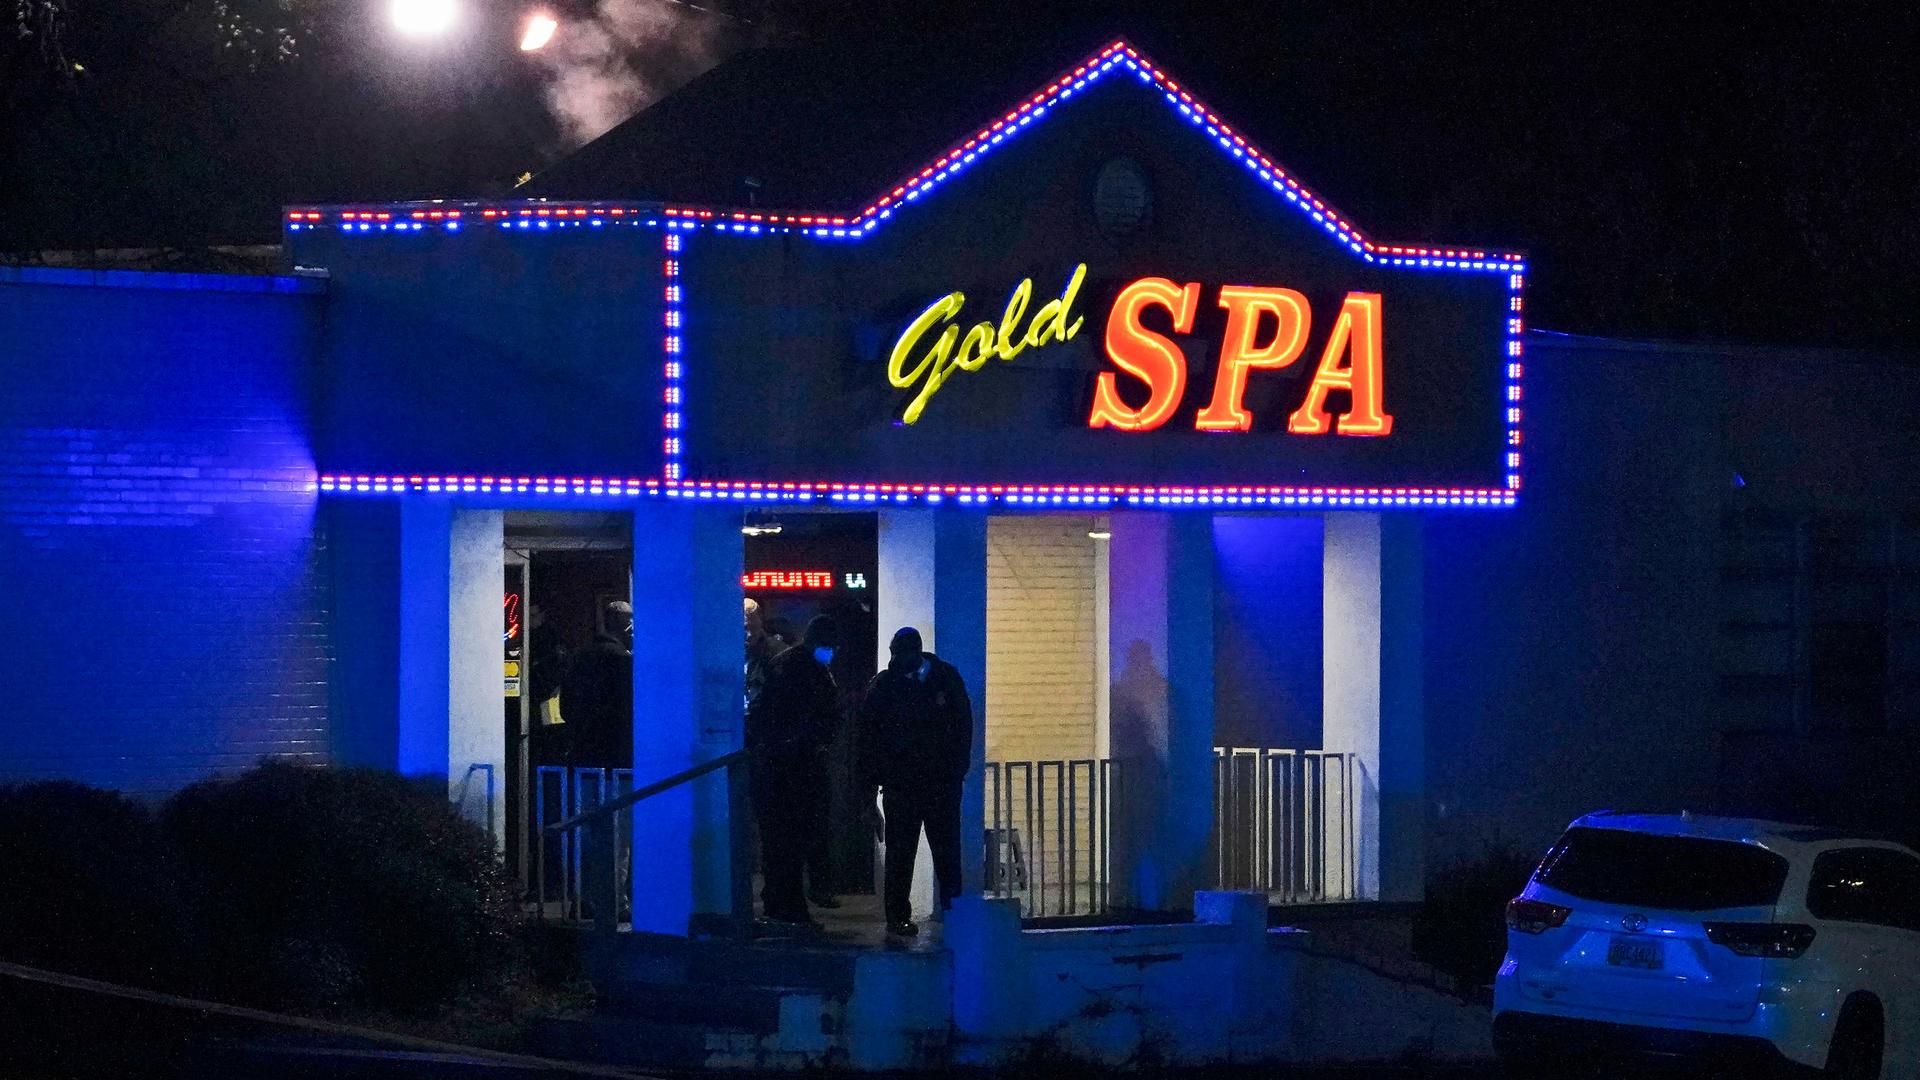 The front door of a spa is shown lit with blue colors and a sign above the entrance with the name, Gold Spa in neon lighting.